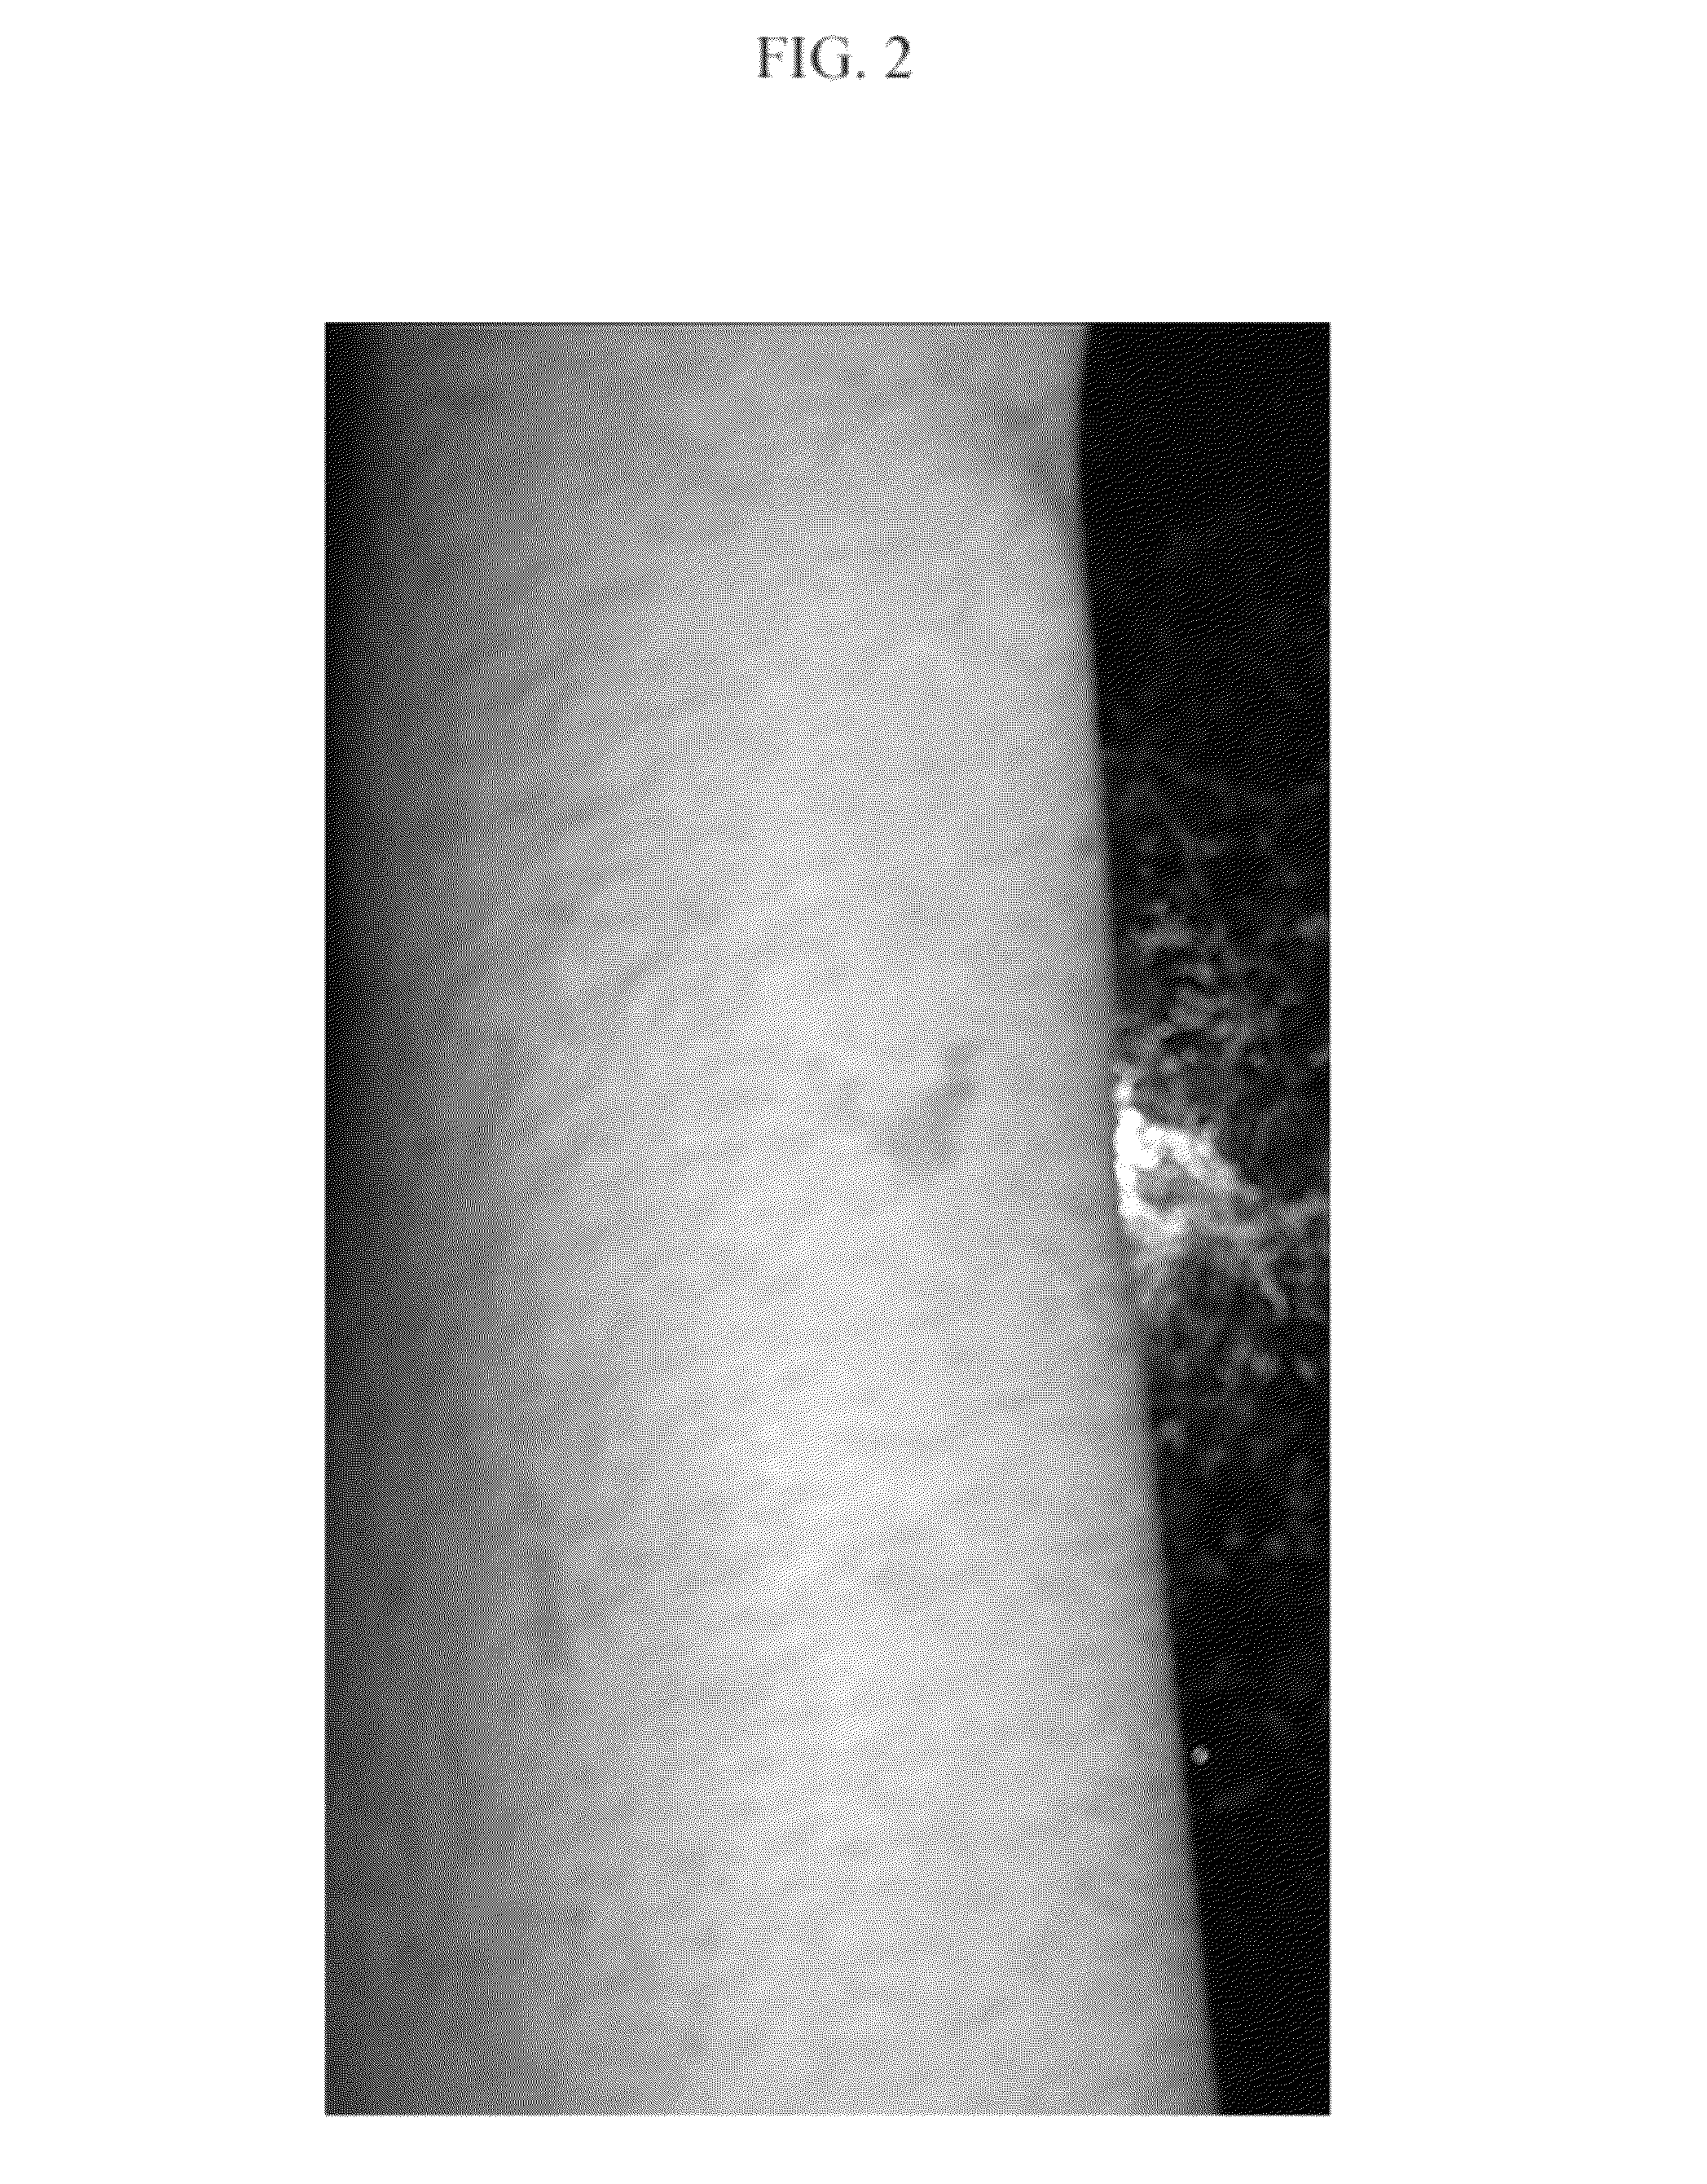 Topical base and active agent-containing compositions, and methods for improving and treating skin